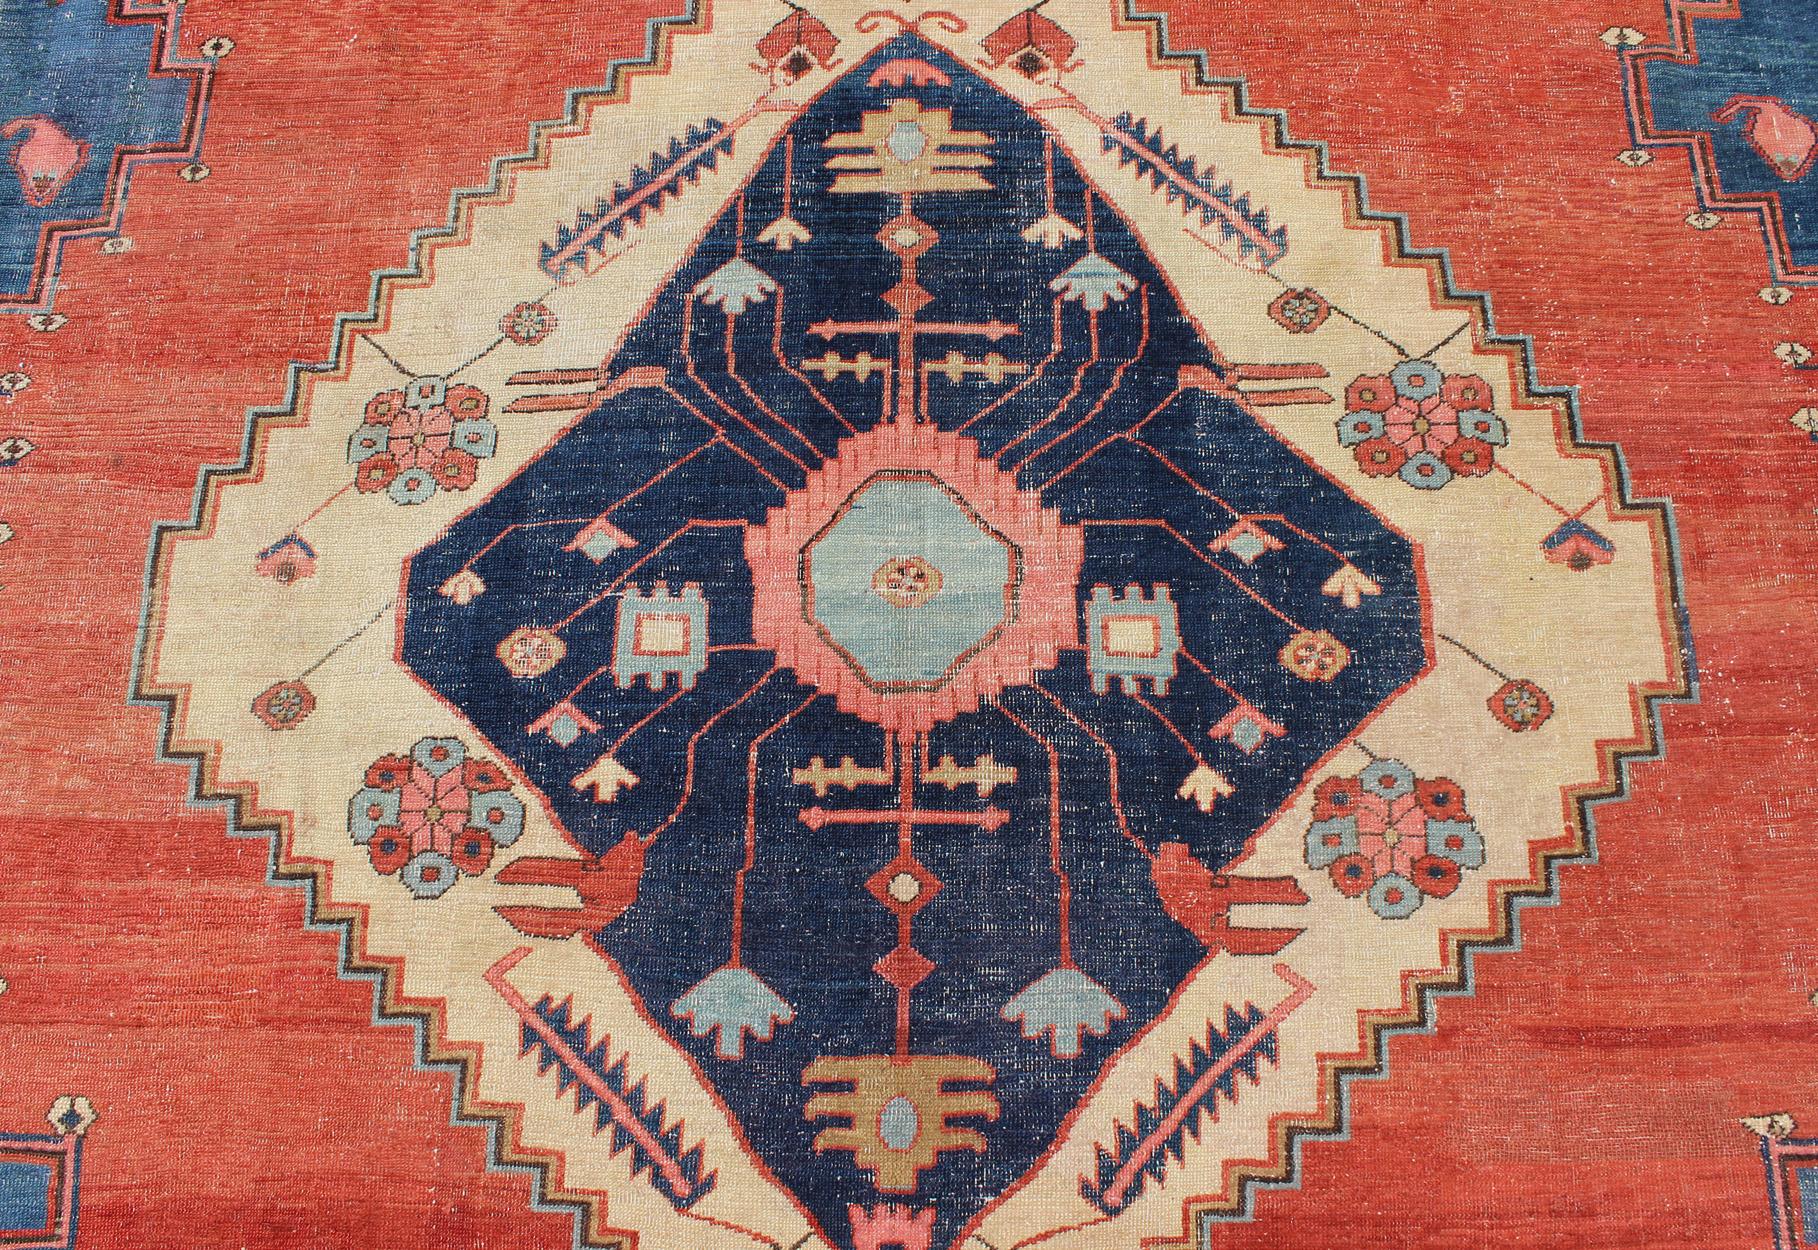 Finely Woven 19th Century Antique Persian Bakhshaiesh Rug in Rust Red and Blue For Sale 5